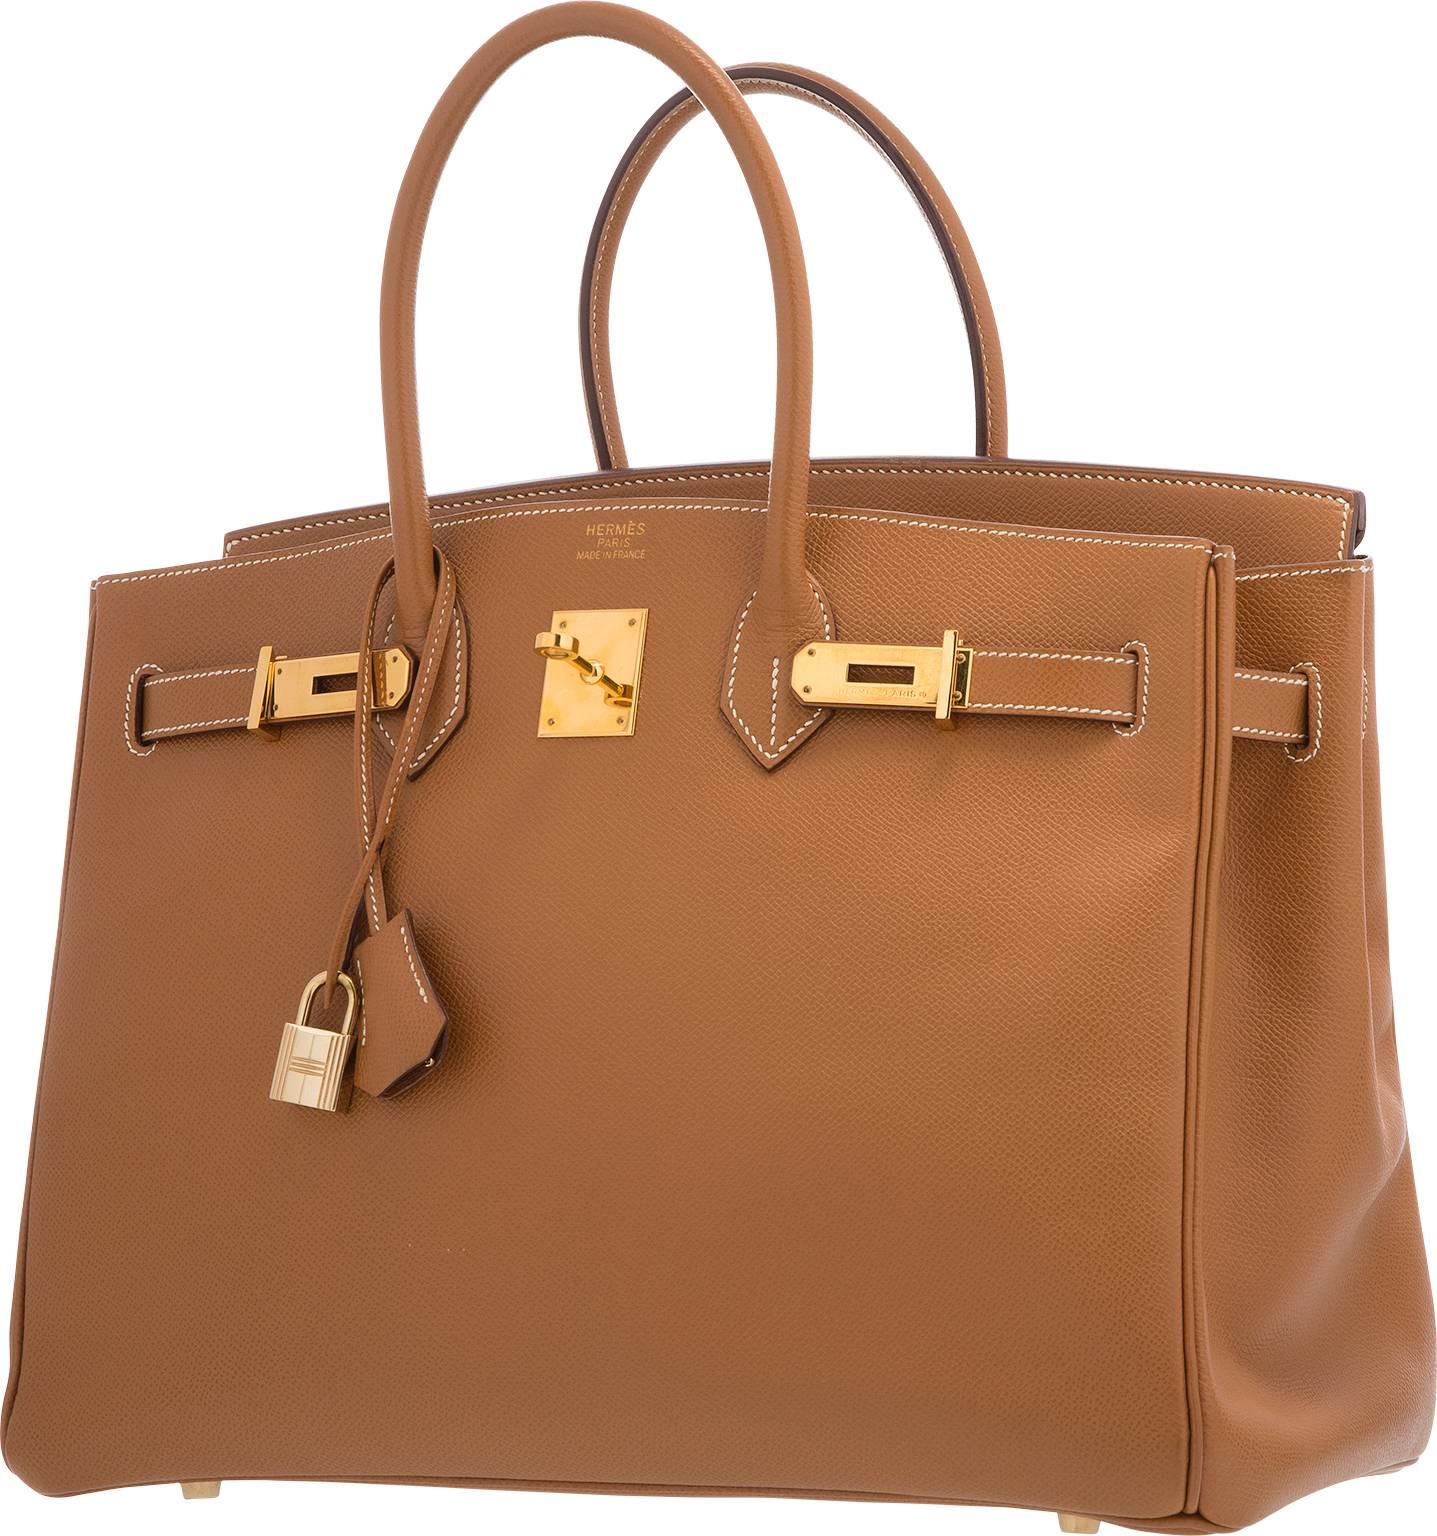 The Birkin bag has become the most sought after luxury accessory in existence due to its functionality, lasting value, and practicality. This bag can be carried for years without ever going out of style. This is a great workhorse bag that makes for